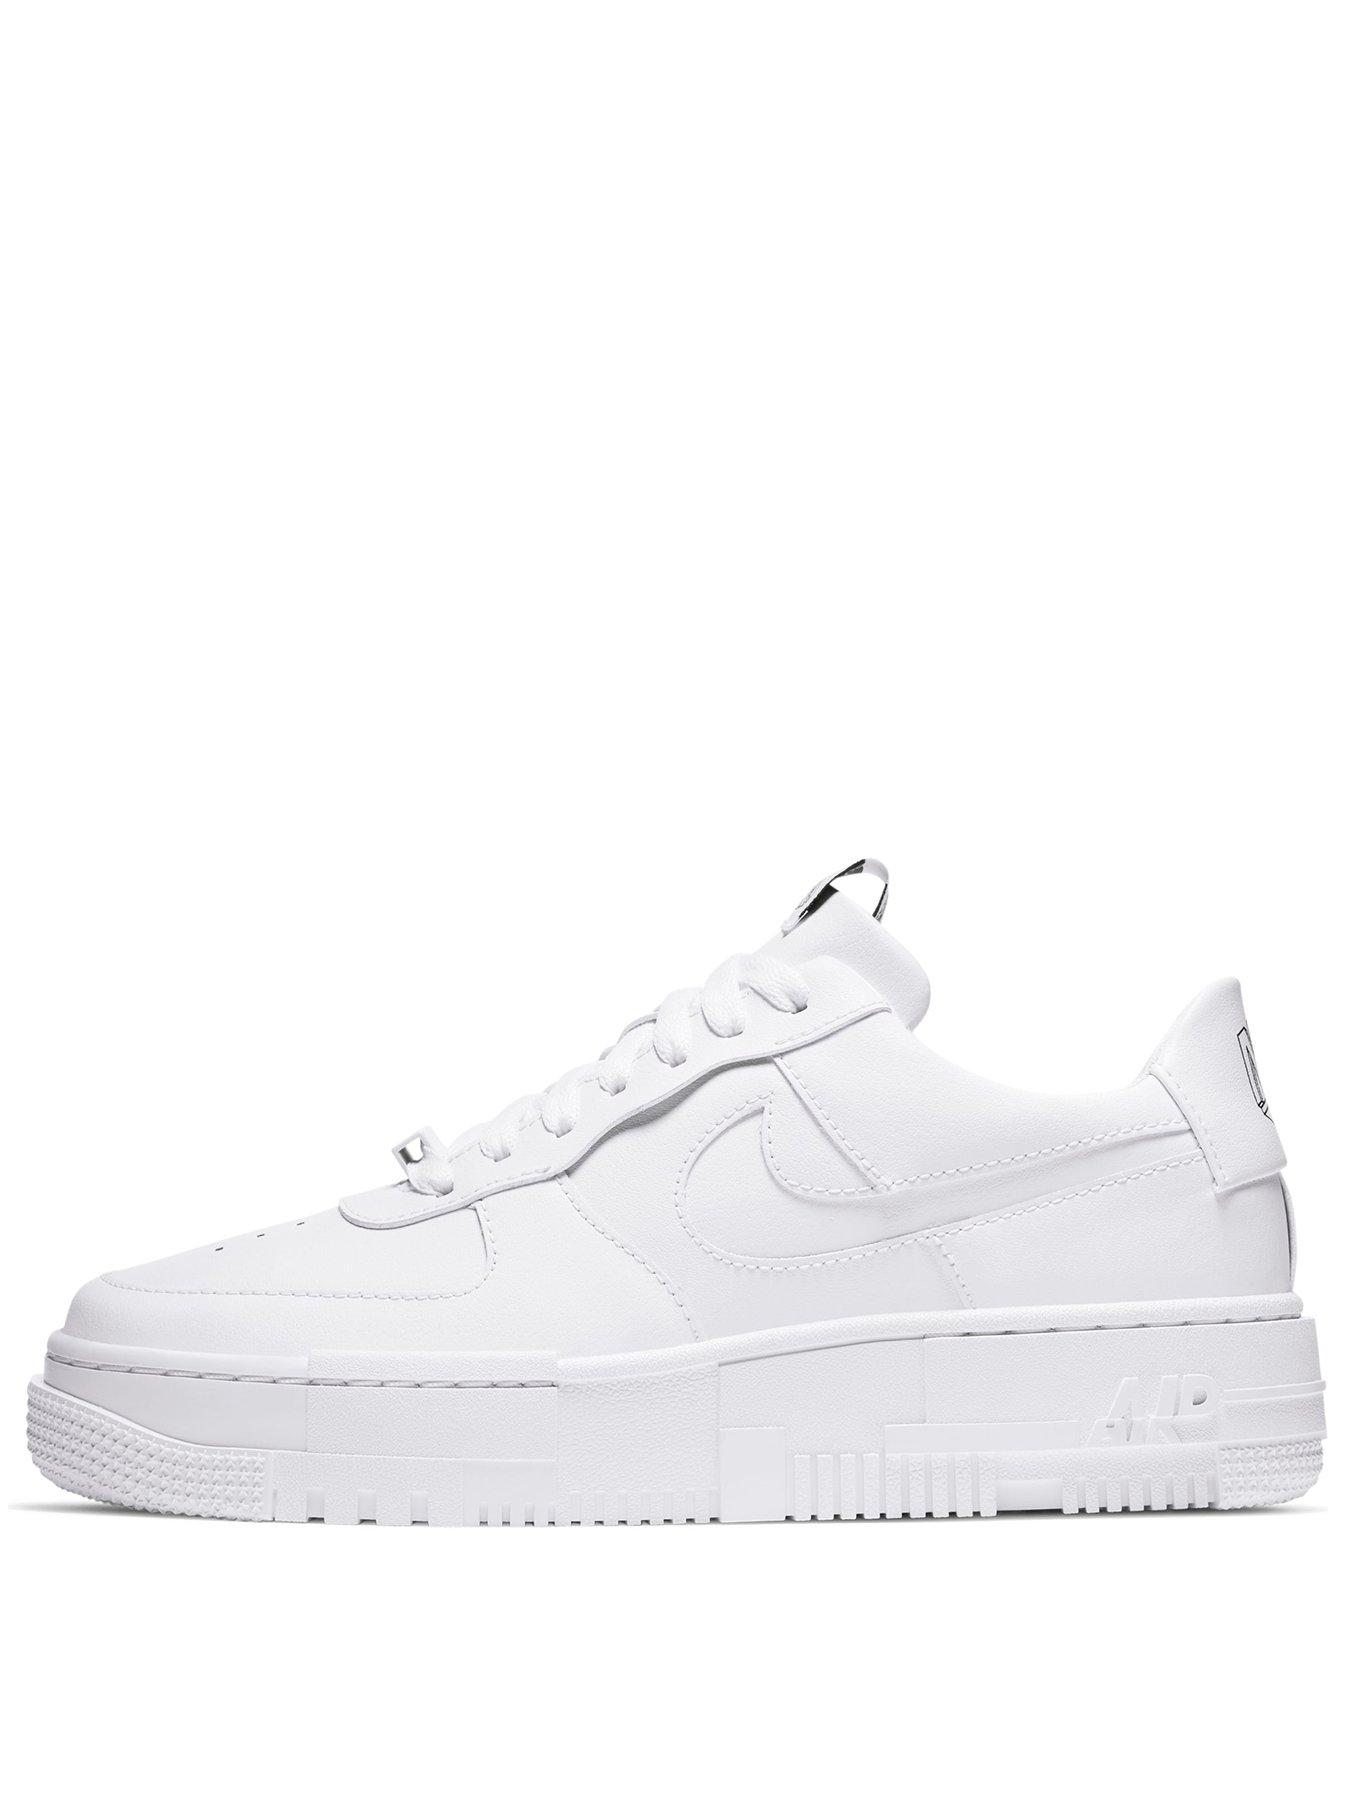 air forces 1 size 3